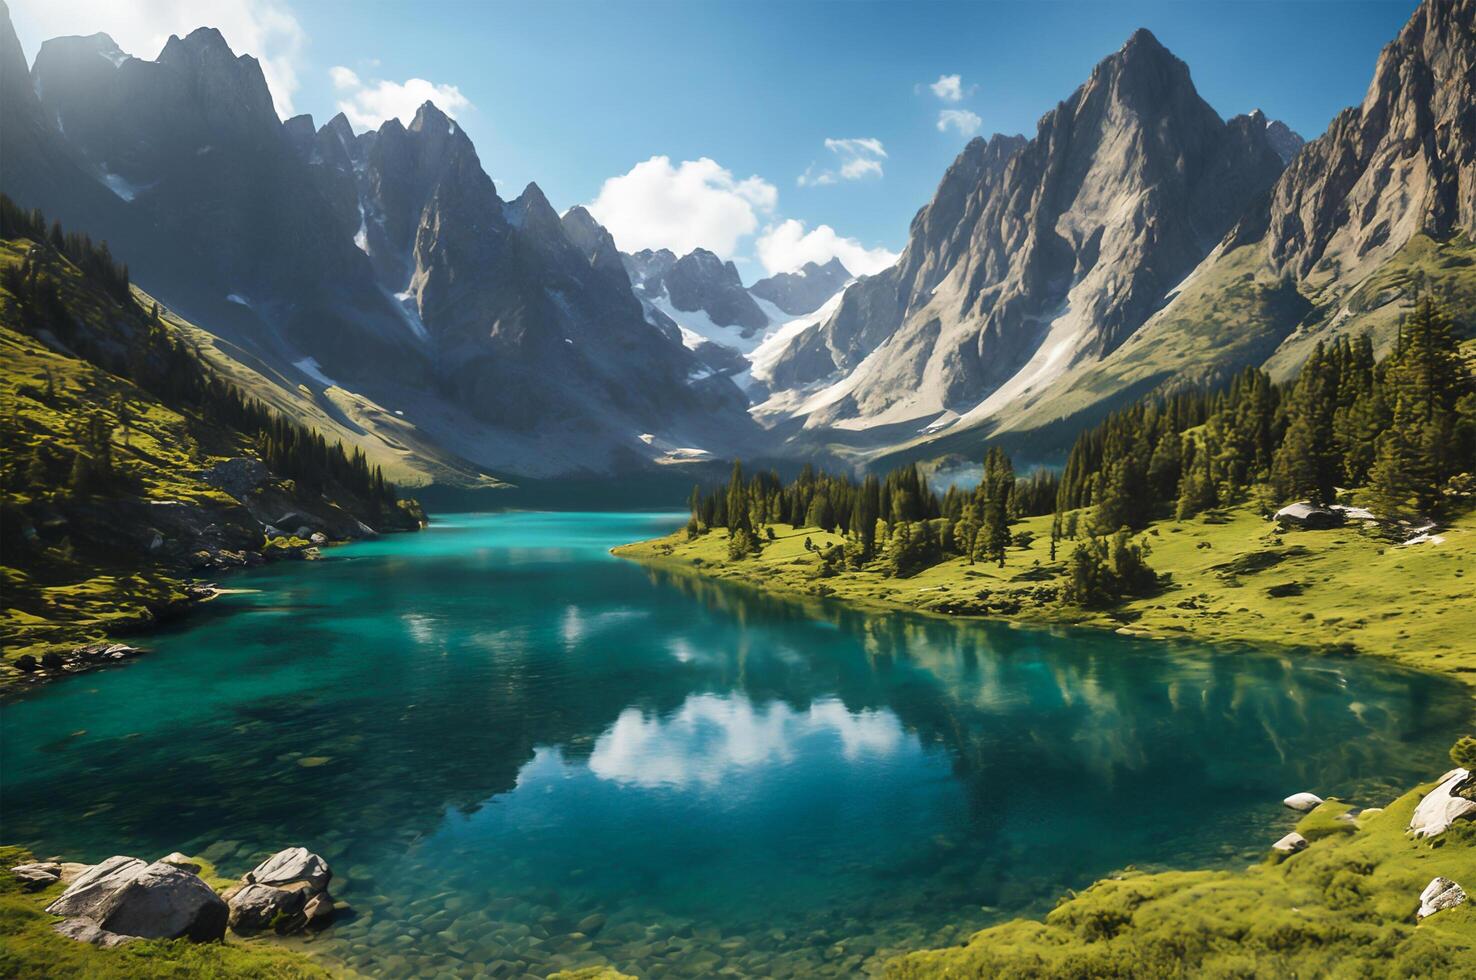 Breathtaking Alpine Landscape Crystal Clear Turquoise Lake Surrounded by Majestic Mountain Peaks and Lush Greenery. Beautiful mountain and lake landscape photo